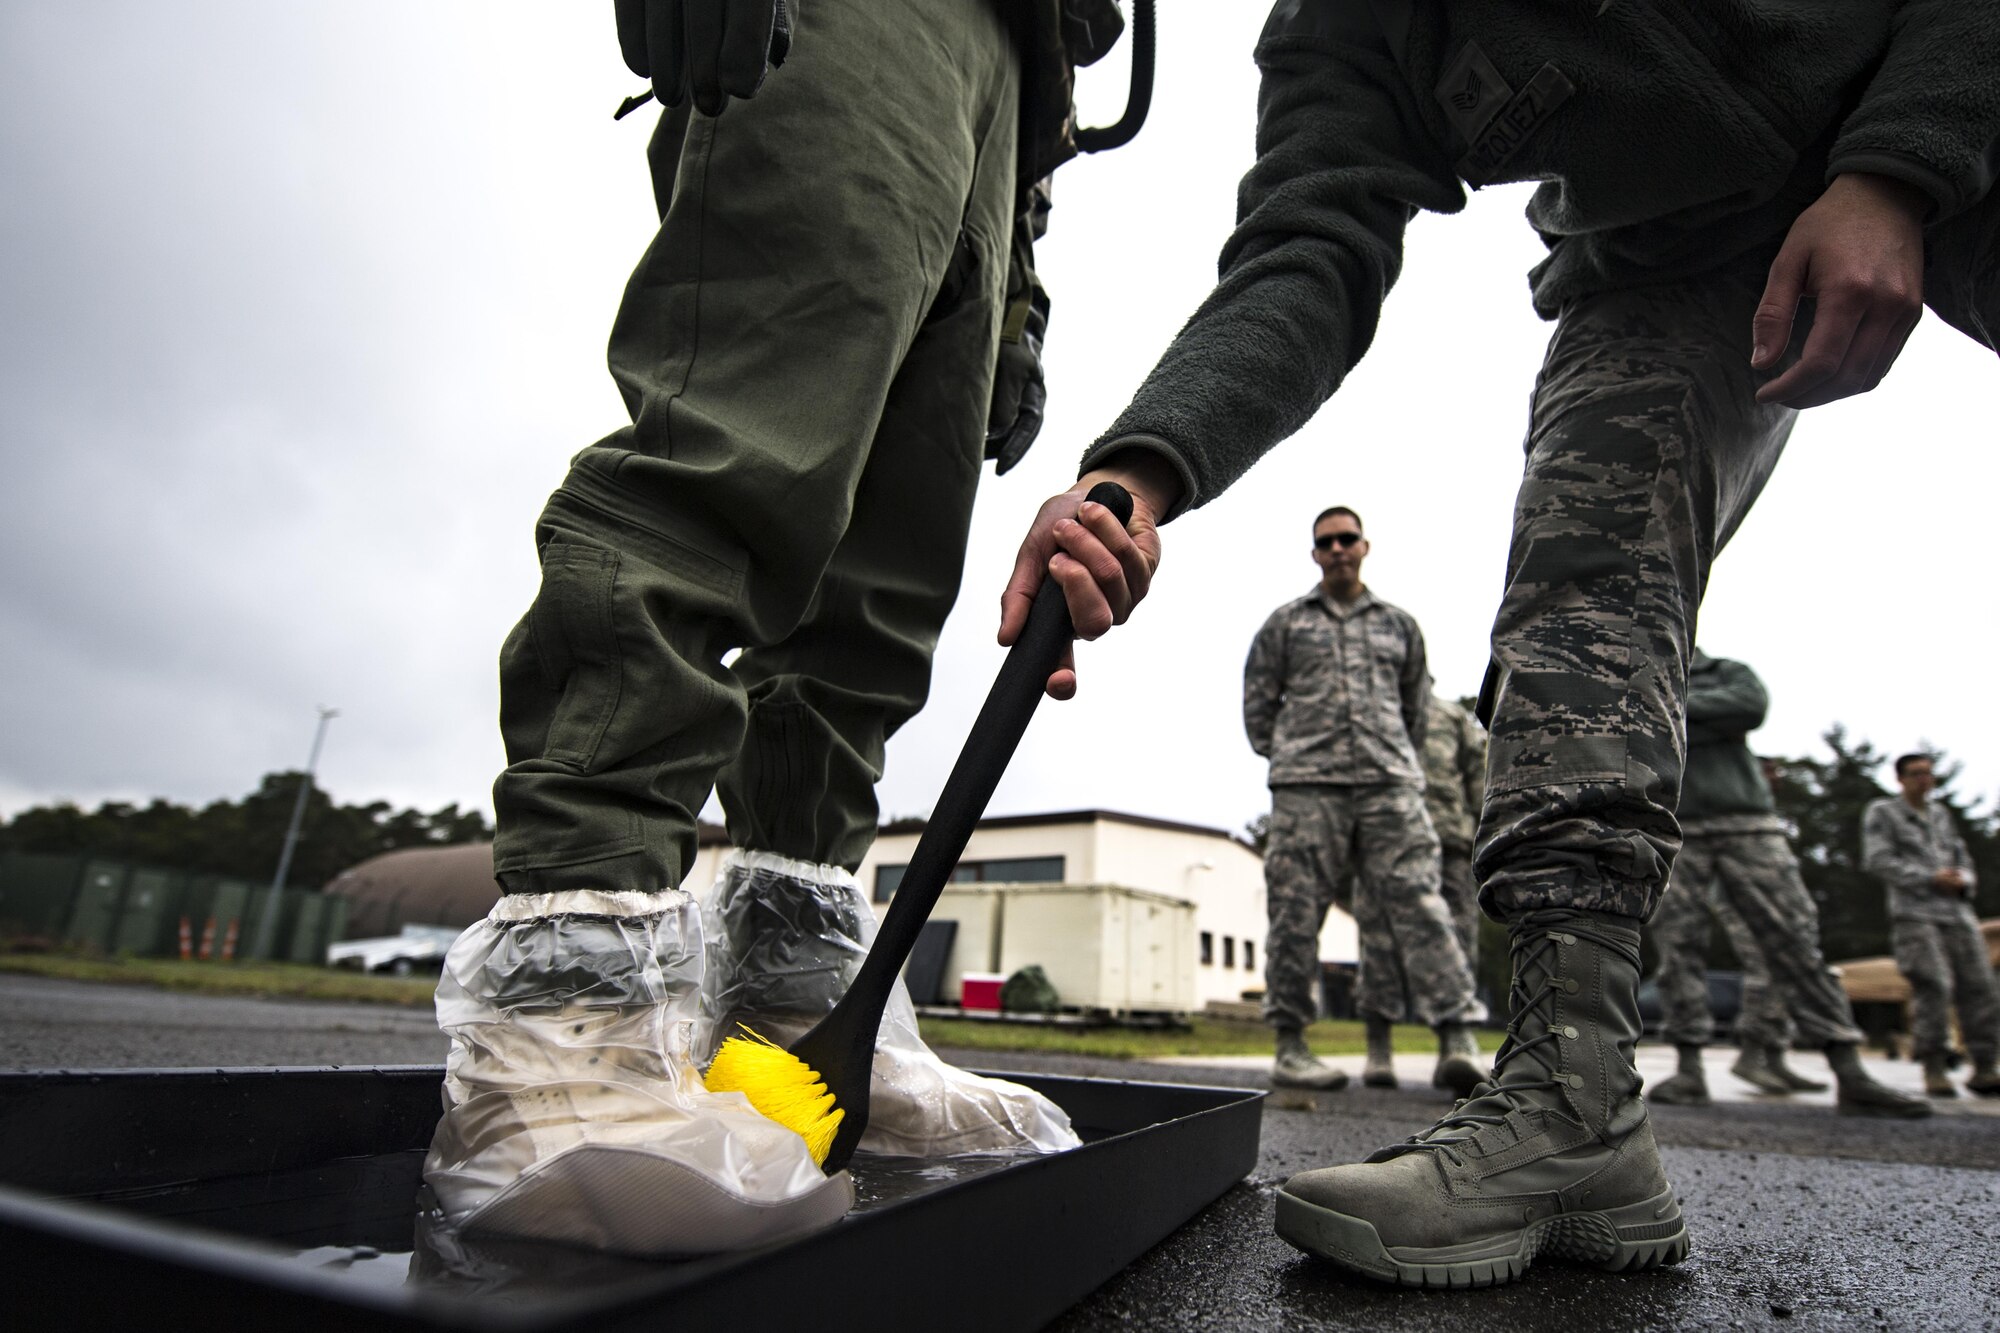 A U.S. Air Force Aircrew Flight Equipment technician decontaminates another AFE technician in a boot wash tray during the Aircrew Contamination Mitigation course on Ramstein Air Base, Germany, Sept. 19, 2017.